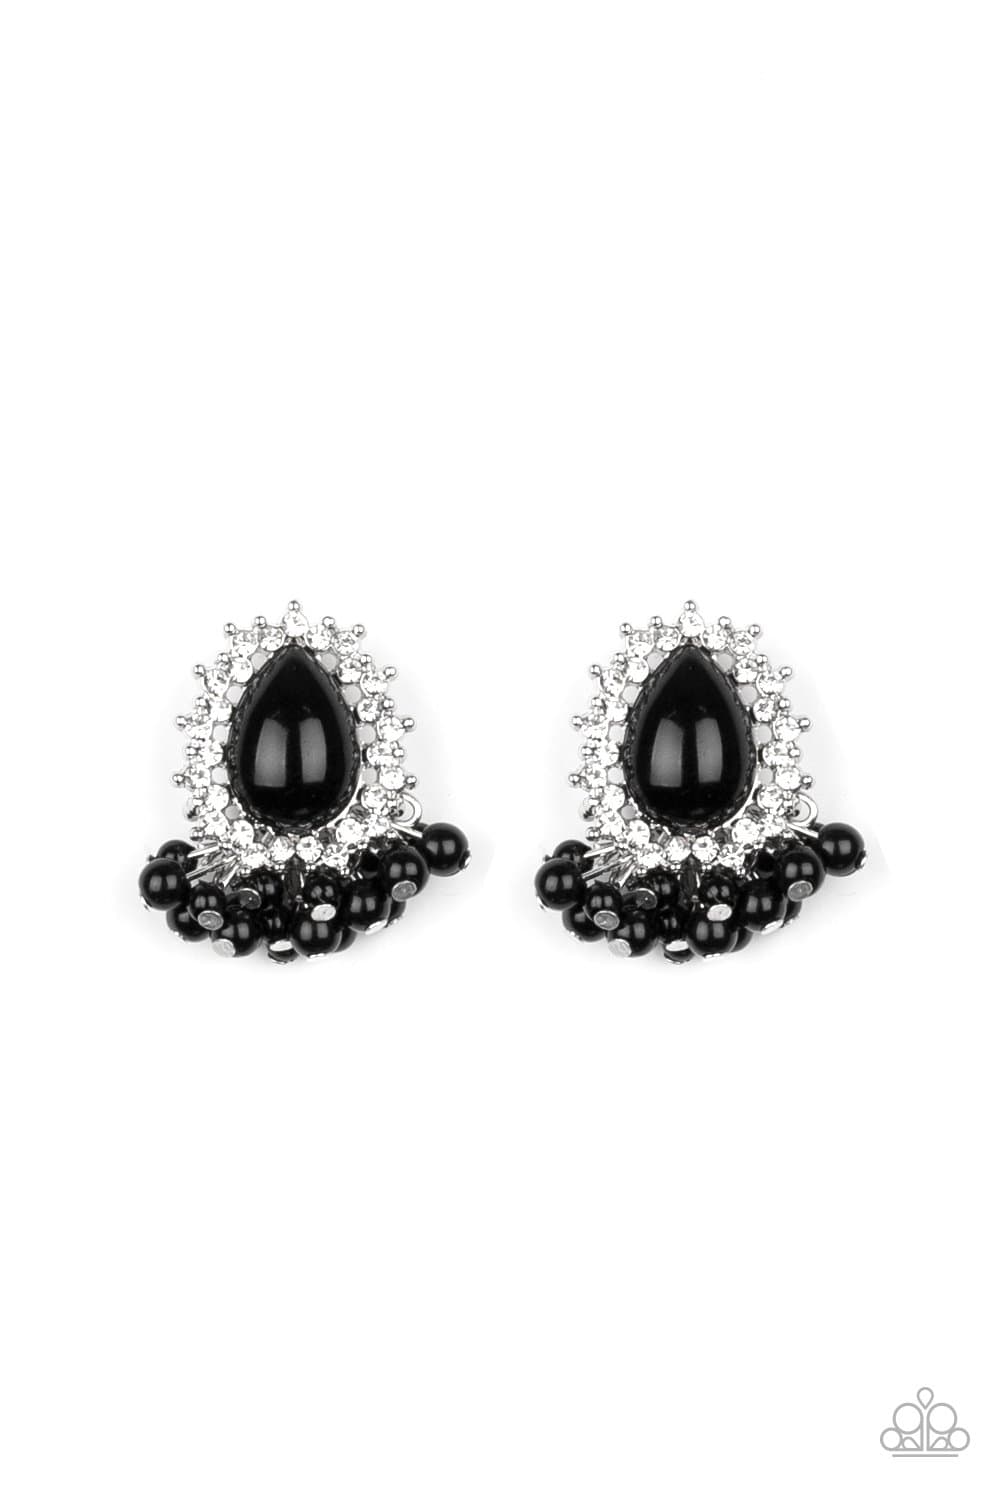 Paparazzi: Castle Cameo - Black Post Earrings - Jewels N’ Thingz Boutique